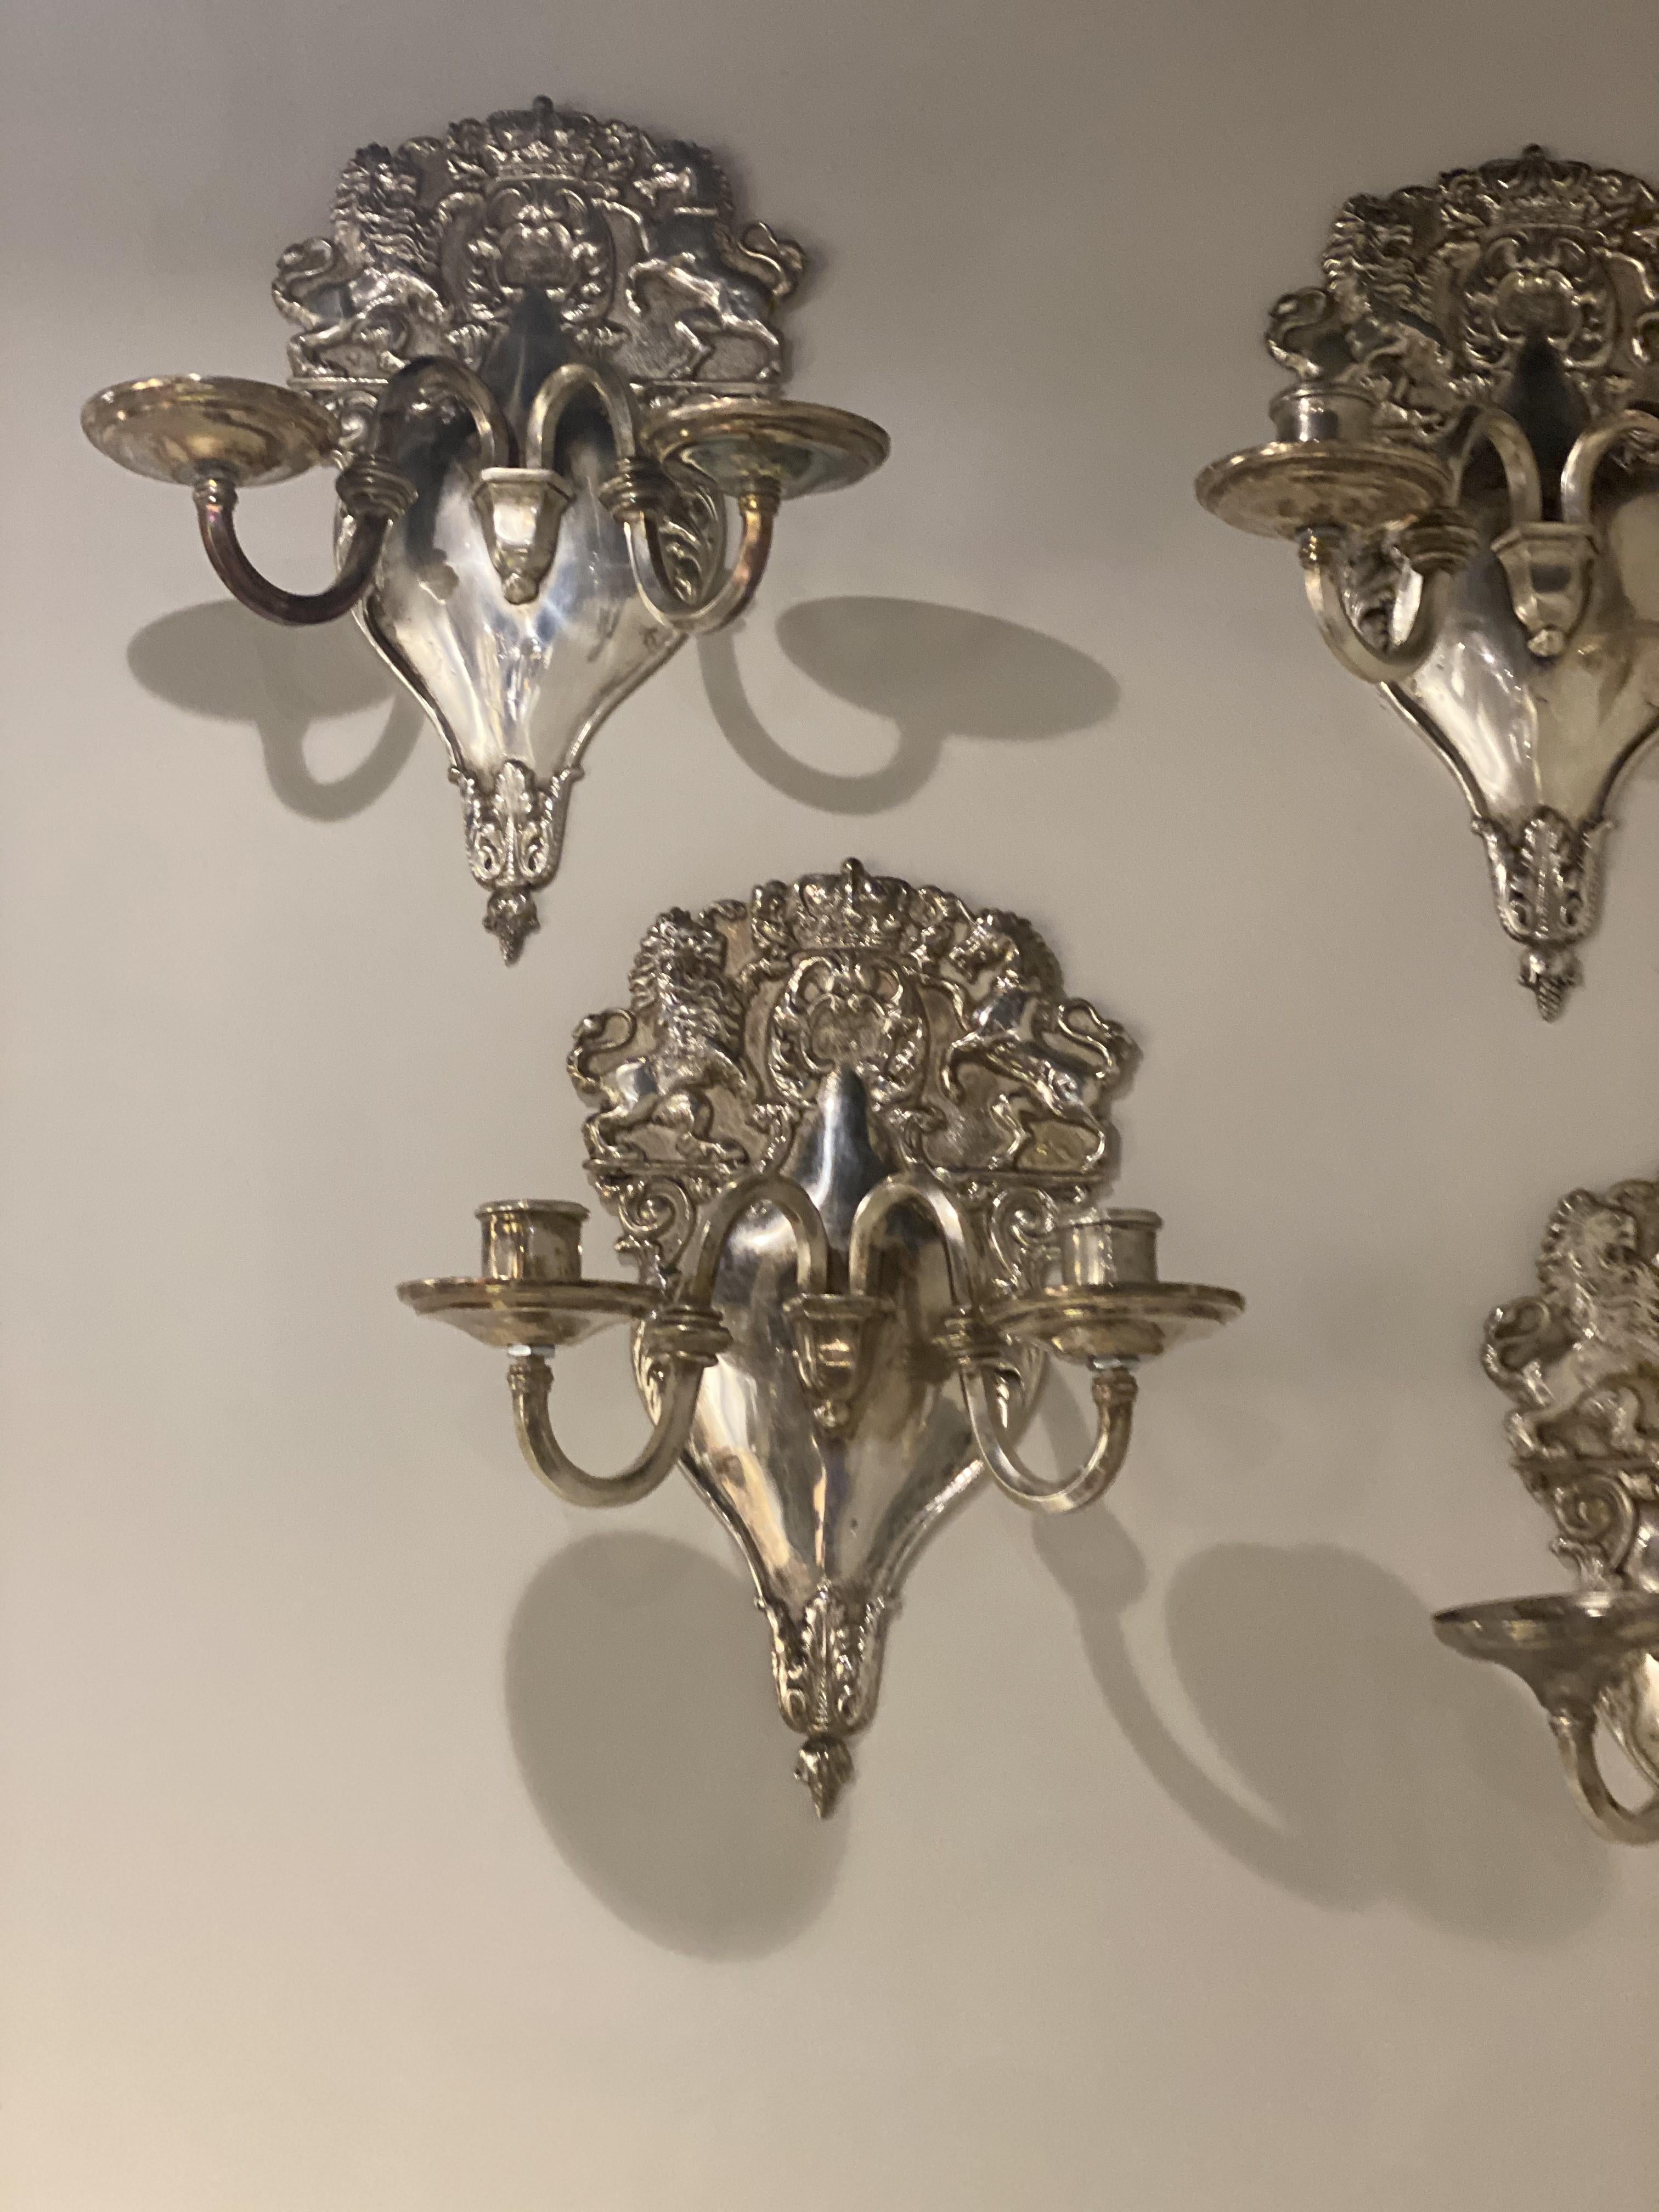 Silvered 1920's English Silver Plated Sconces with Heraldry Design For Sale